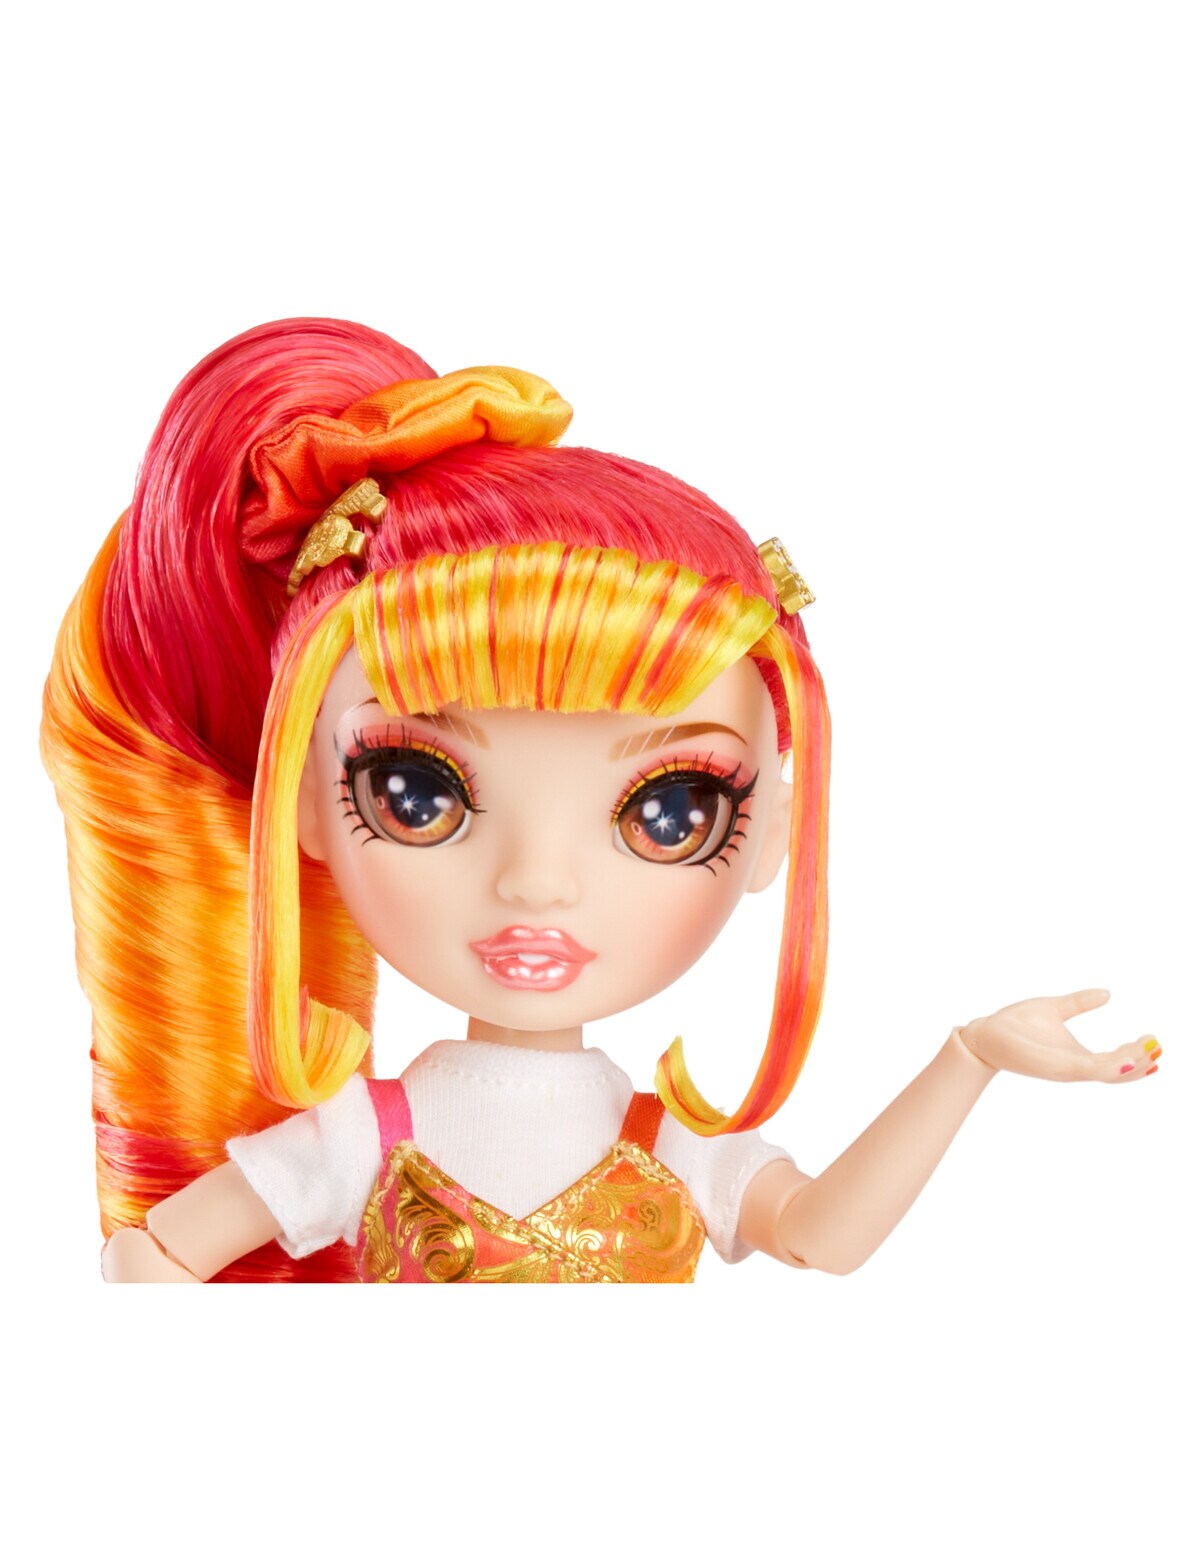 Enchantimals Doll With Her Little Sister Assorted Multicolor